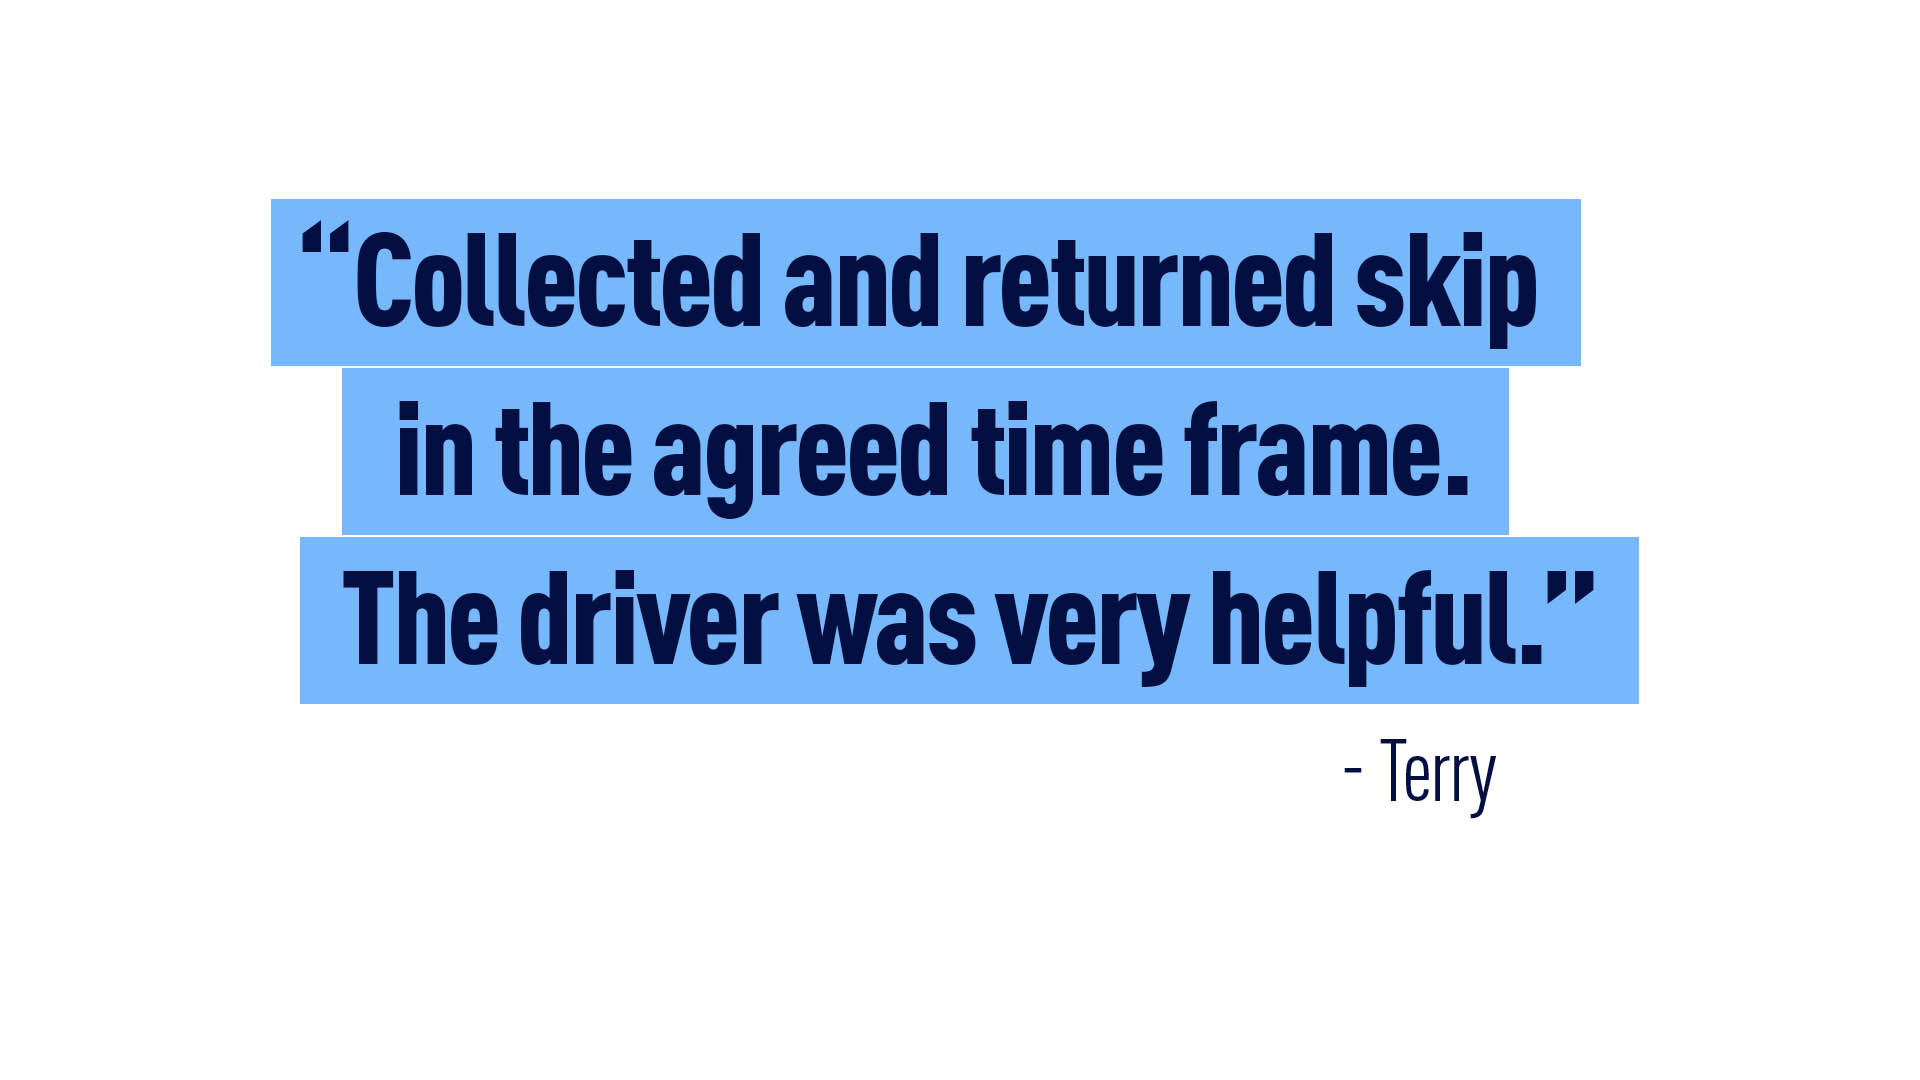 “Collected and returned skip in the agreed time frame. The Driver was very helpful.” - Terry